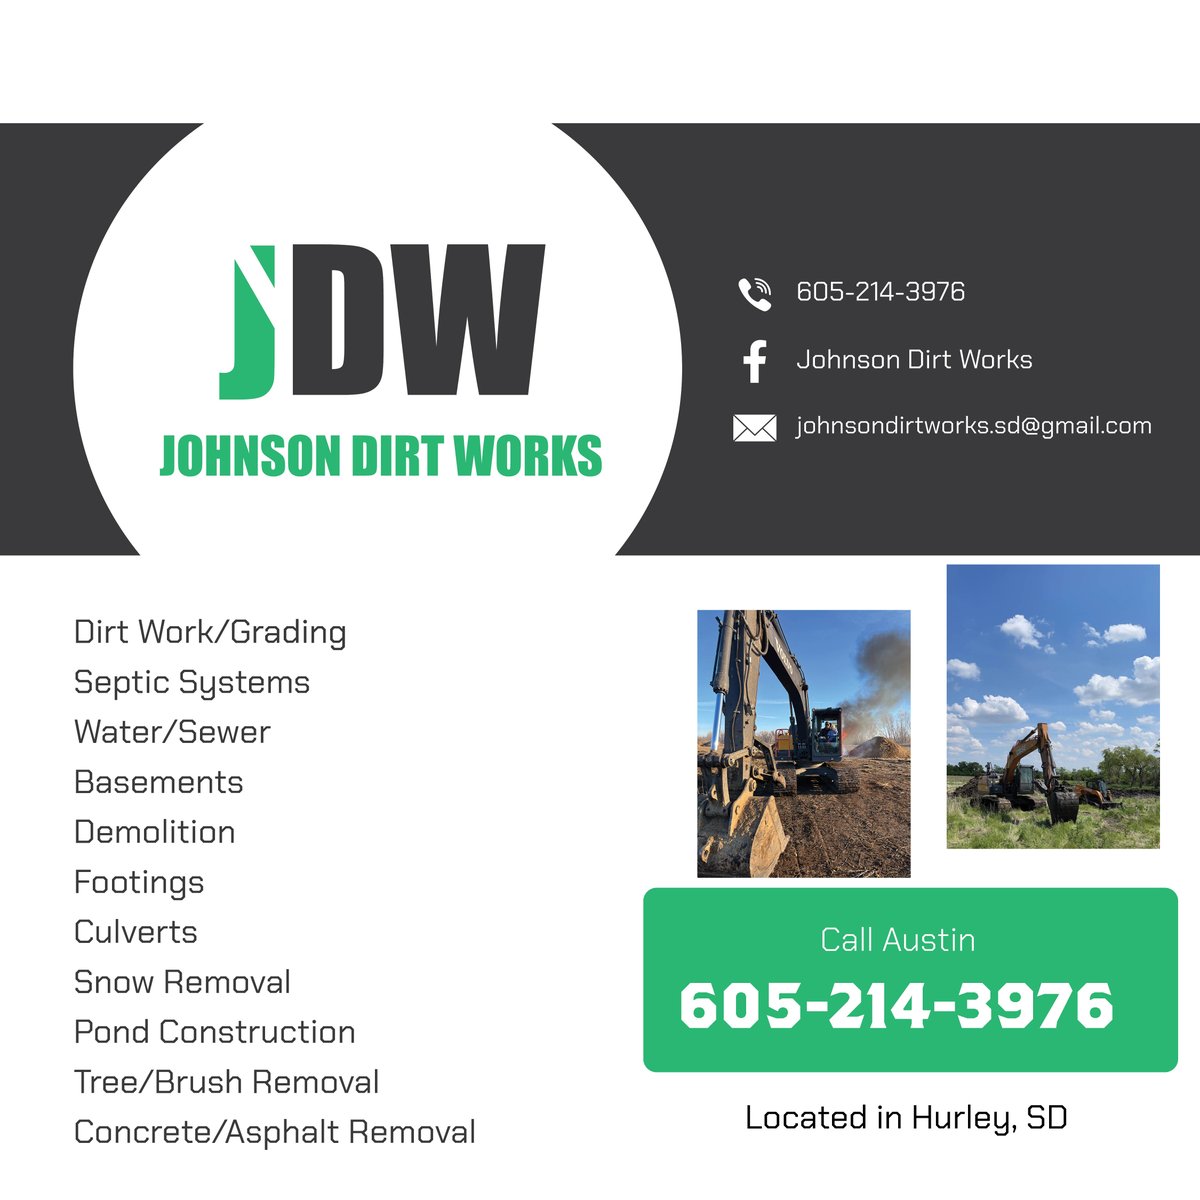 Johnson Dirt Works is an excavating company based out of Hurley, SD. We provide a variety of services including dirt work, water/sewer installation, and demolition. Give Austin a call at 605-214-3976 for all of your dirtwork needs!